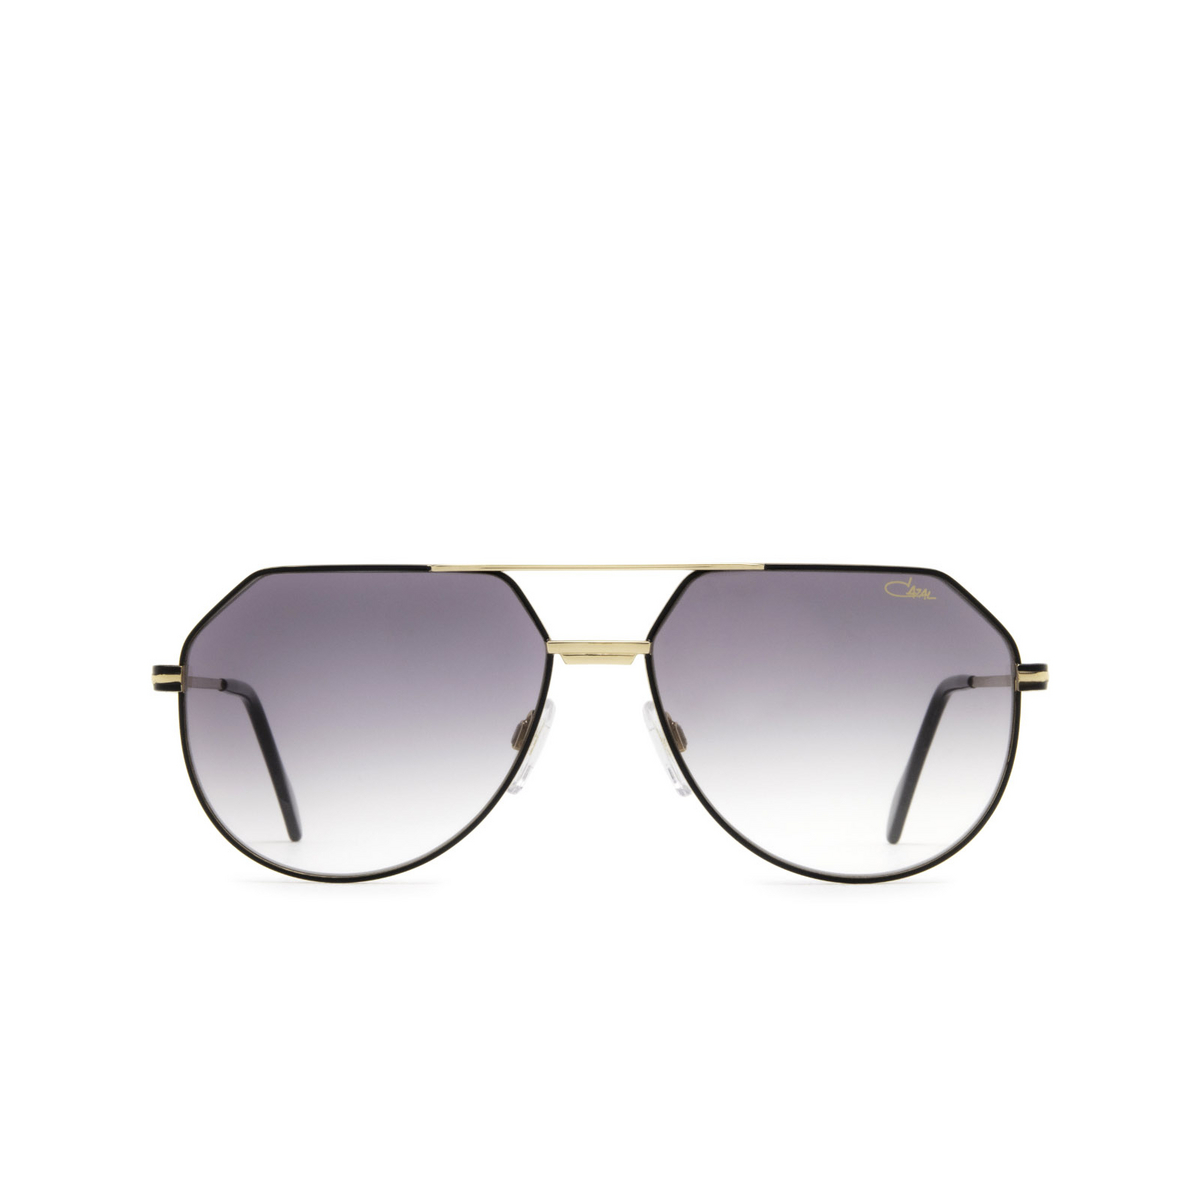 Cazal® Aviator Sunglasses: 724/3 color 002 Black - Gold - front view